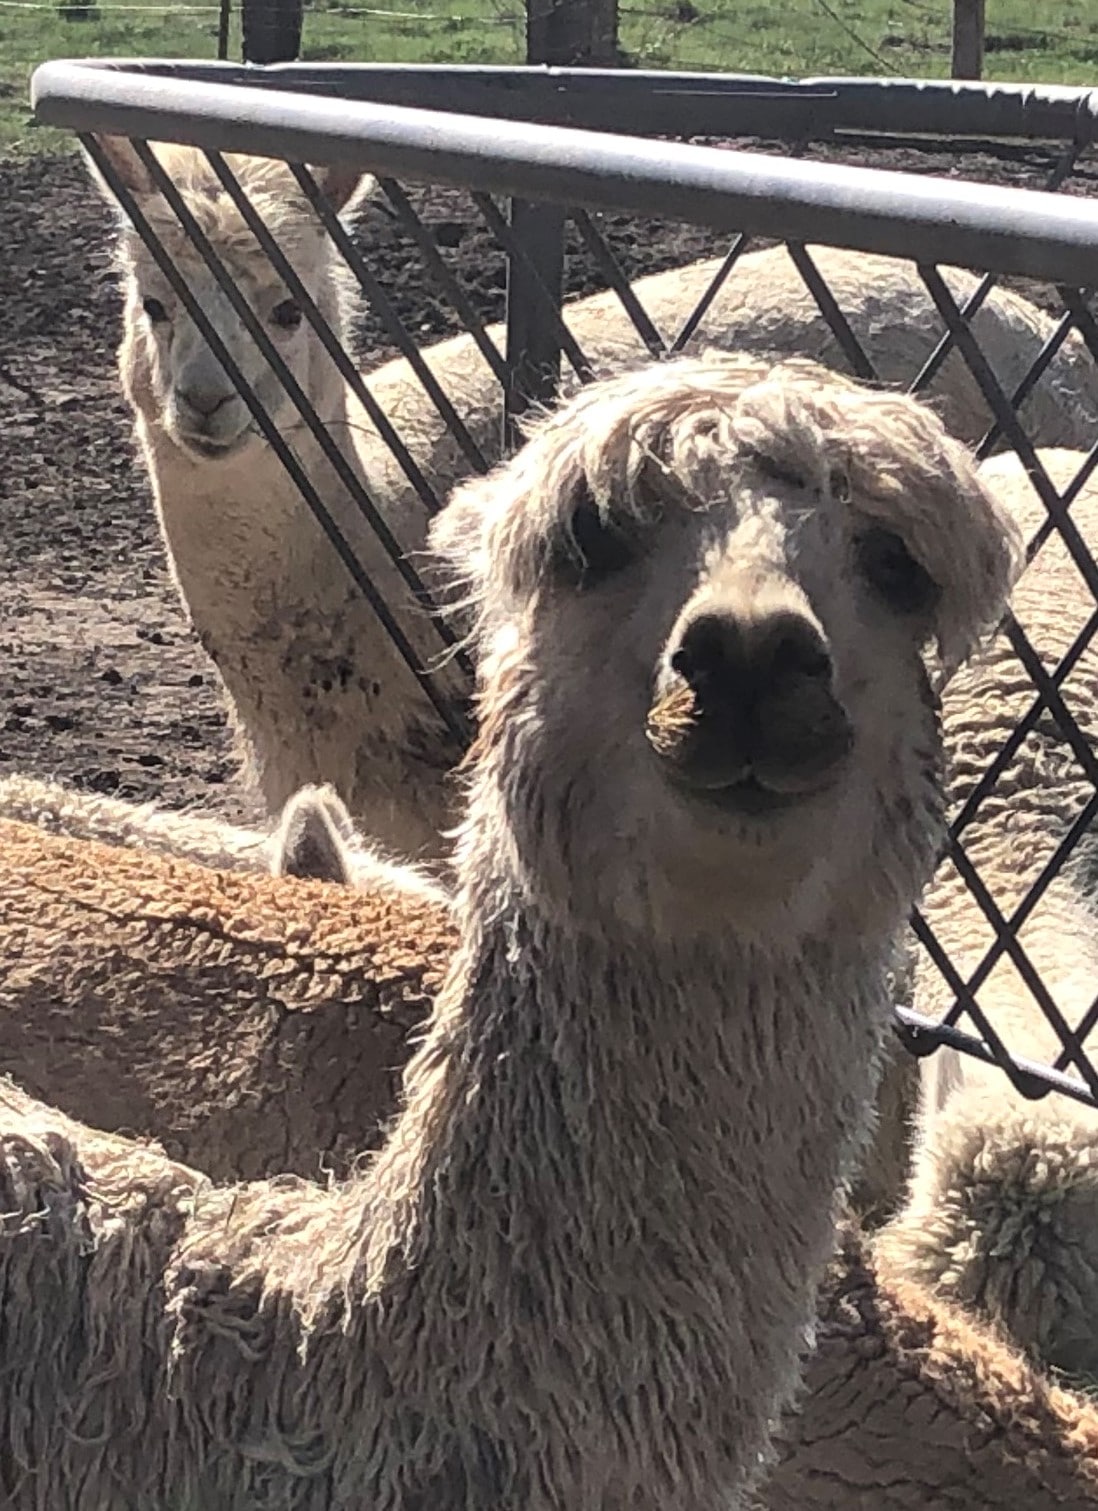 Alpaca with droopy eyes